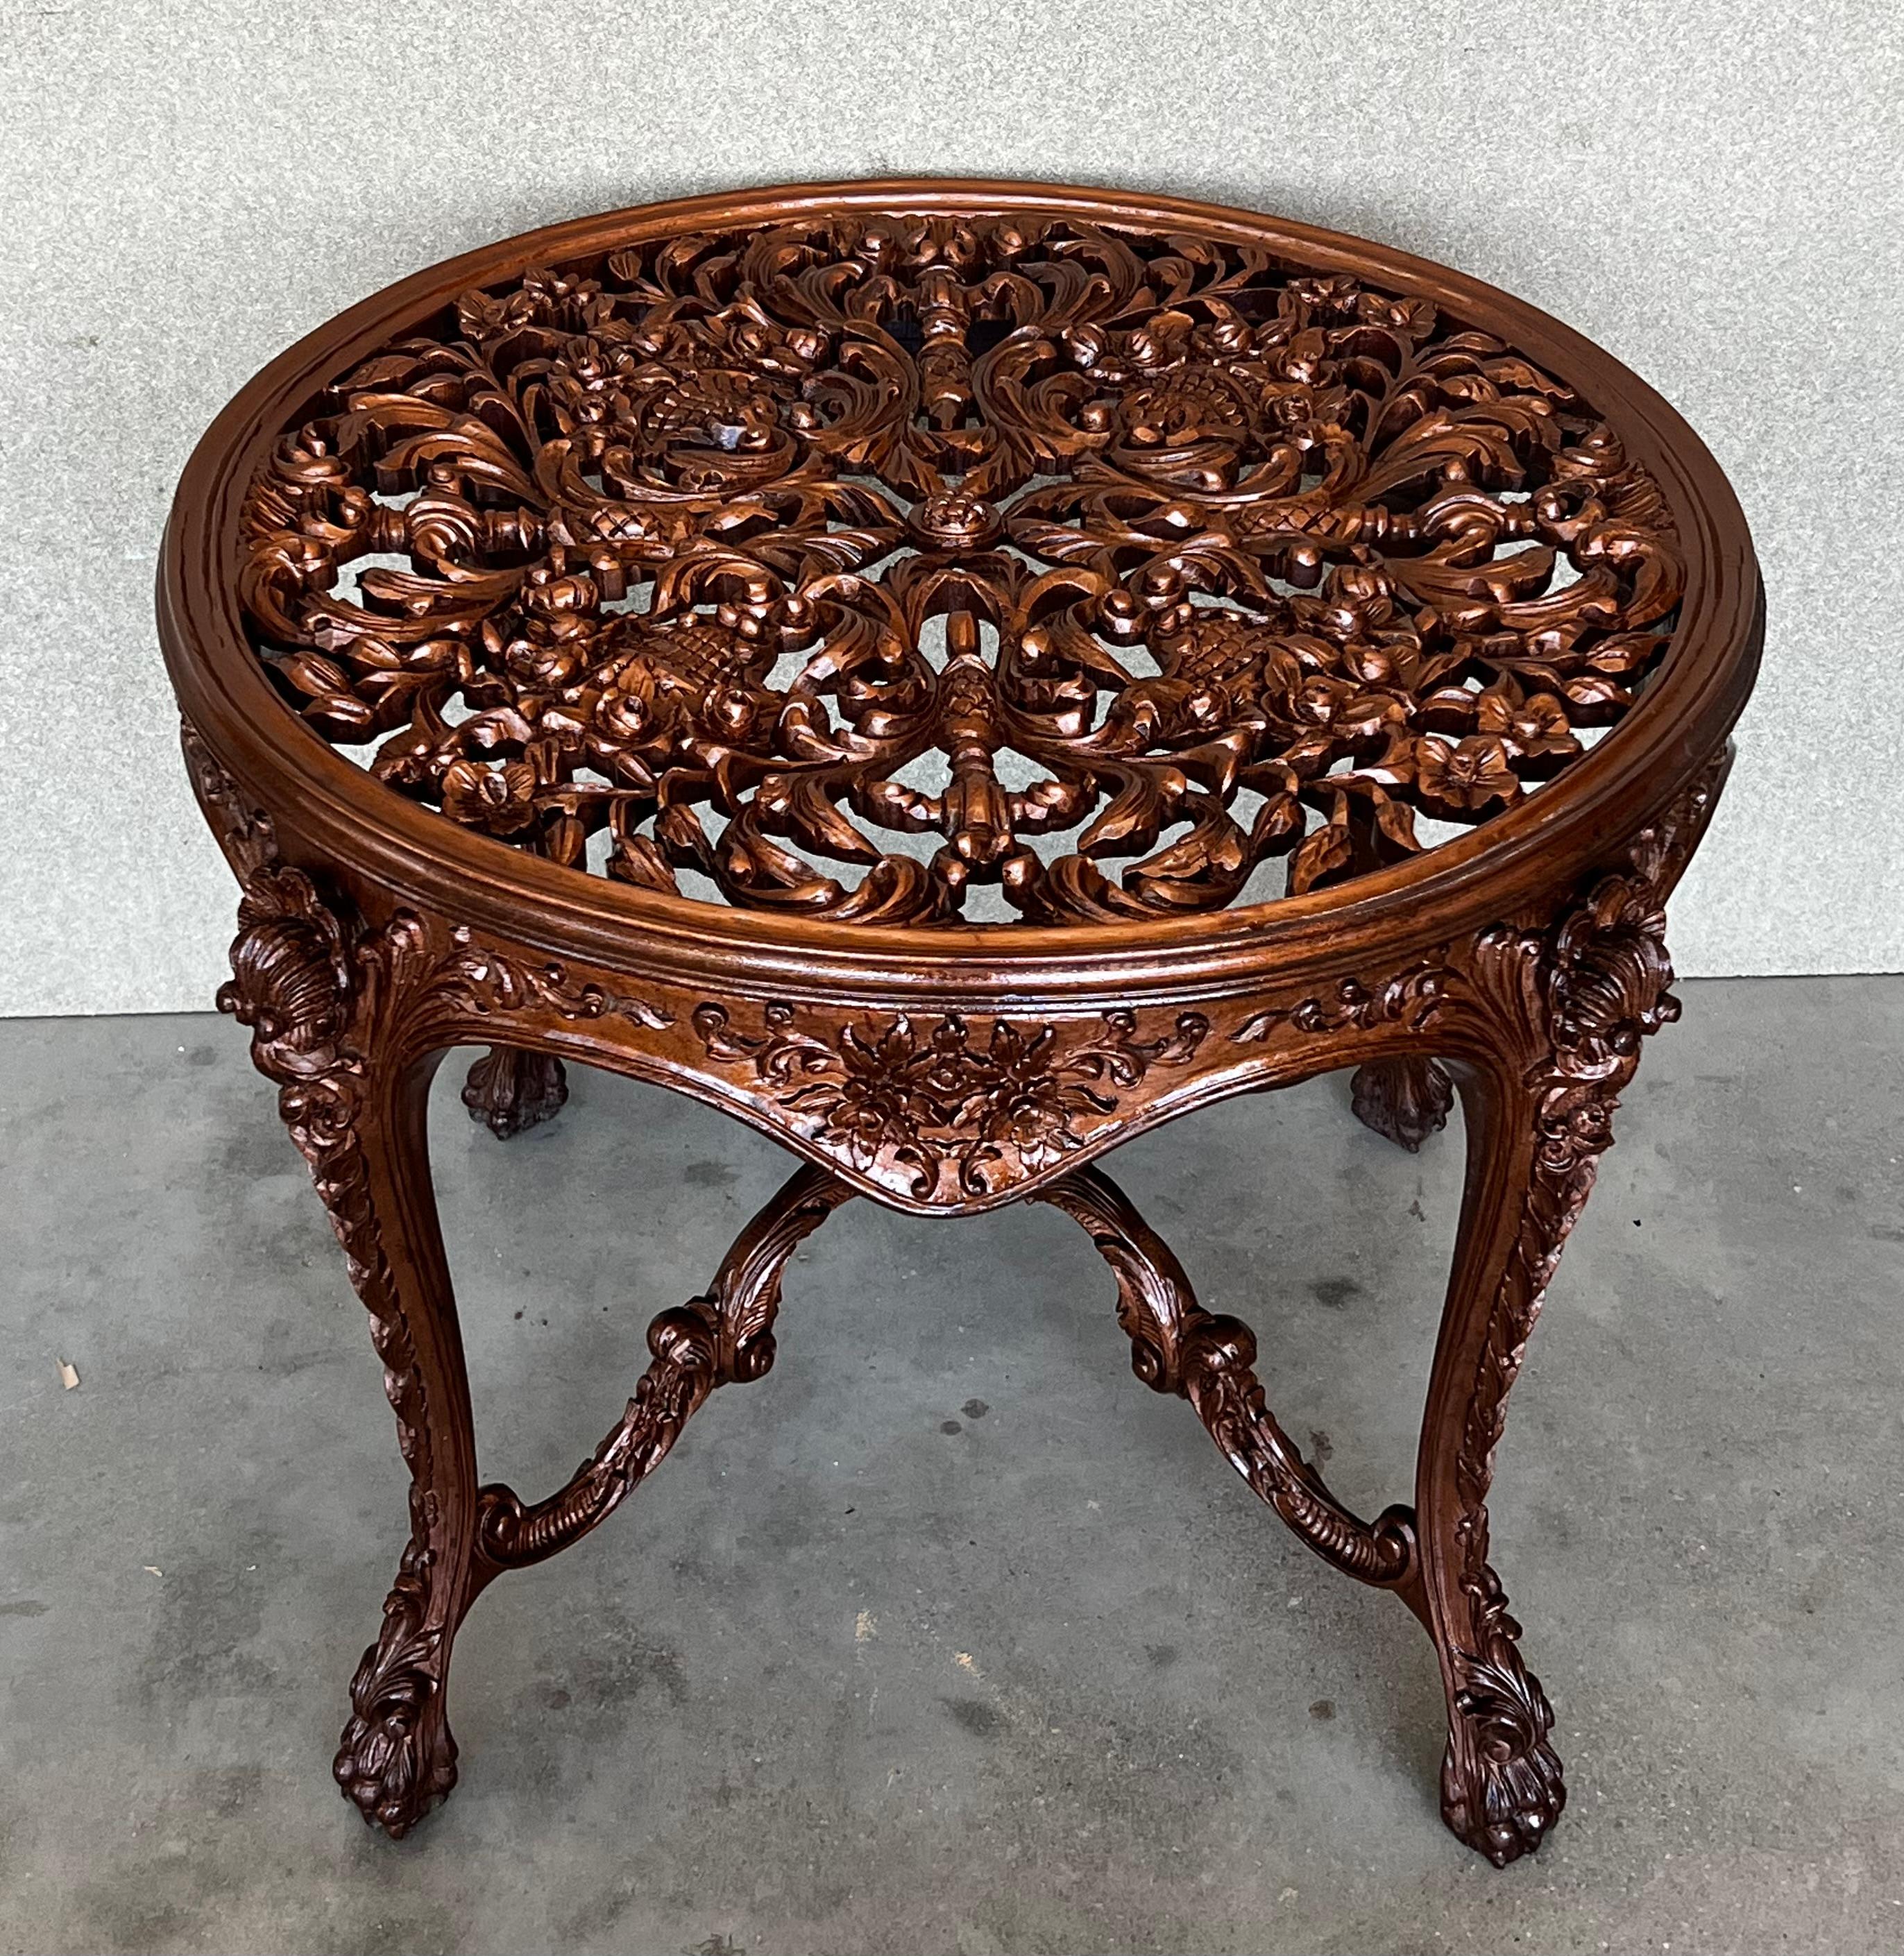 20th Century 20th Mariano Garcia Spanish Side Table with Highly Carved Top and Legs For Sale